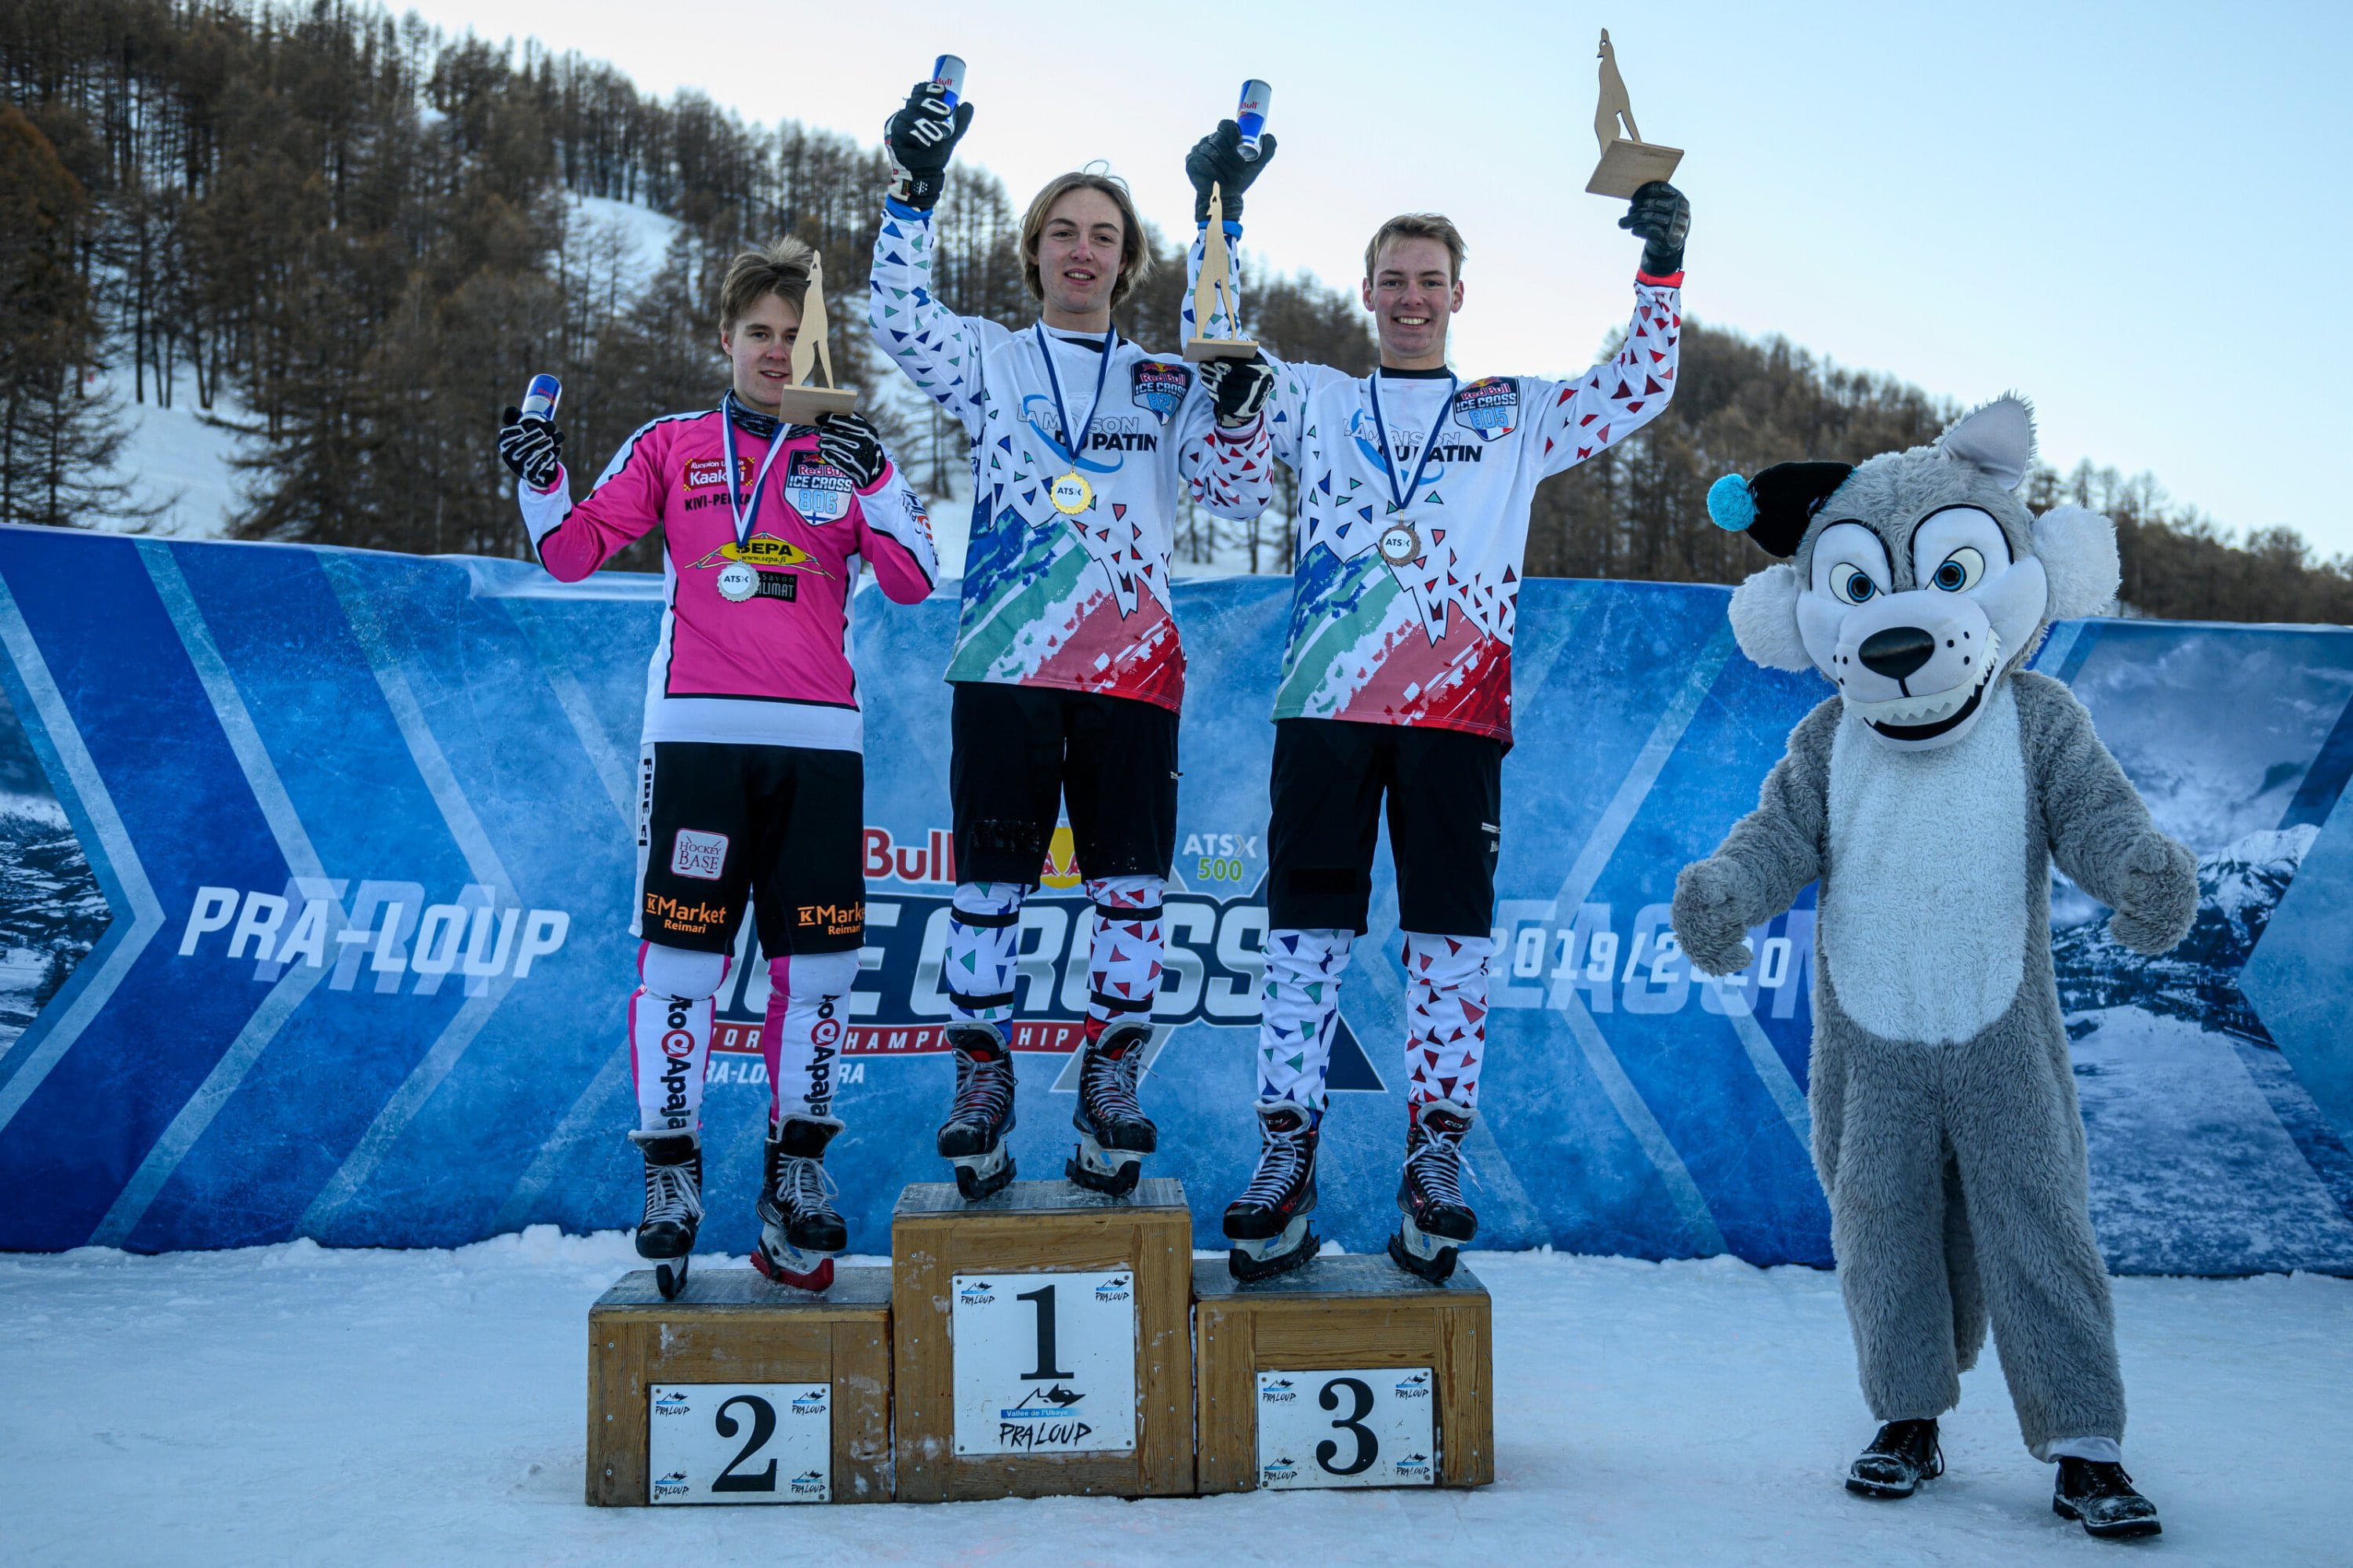 Brothers Arthur (middle) and Theo Richalet-Chaudeur (right) stood on the podium in Pra-Loup earlier this season. Image: Joerg Mitter / Red Bull Content Pool